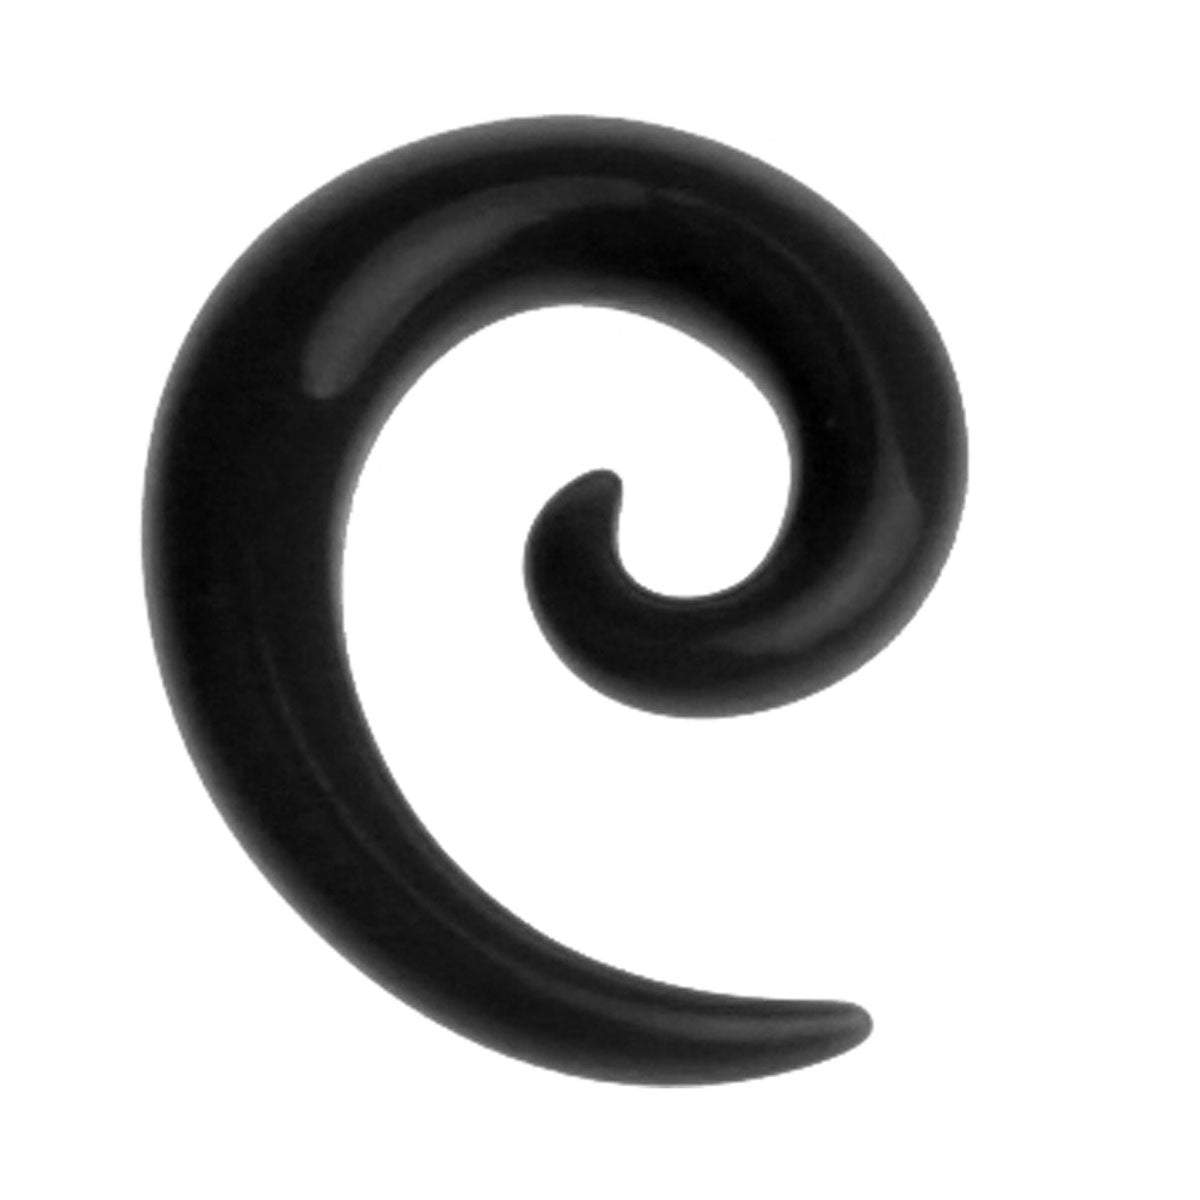 Spiral stretch earring 5mm (acrylic)